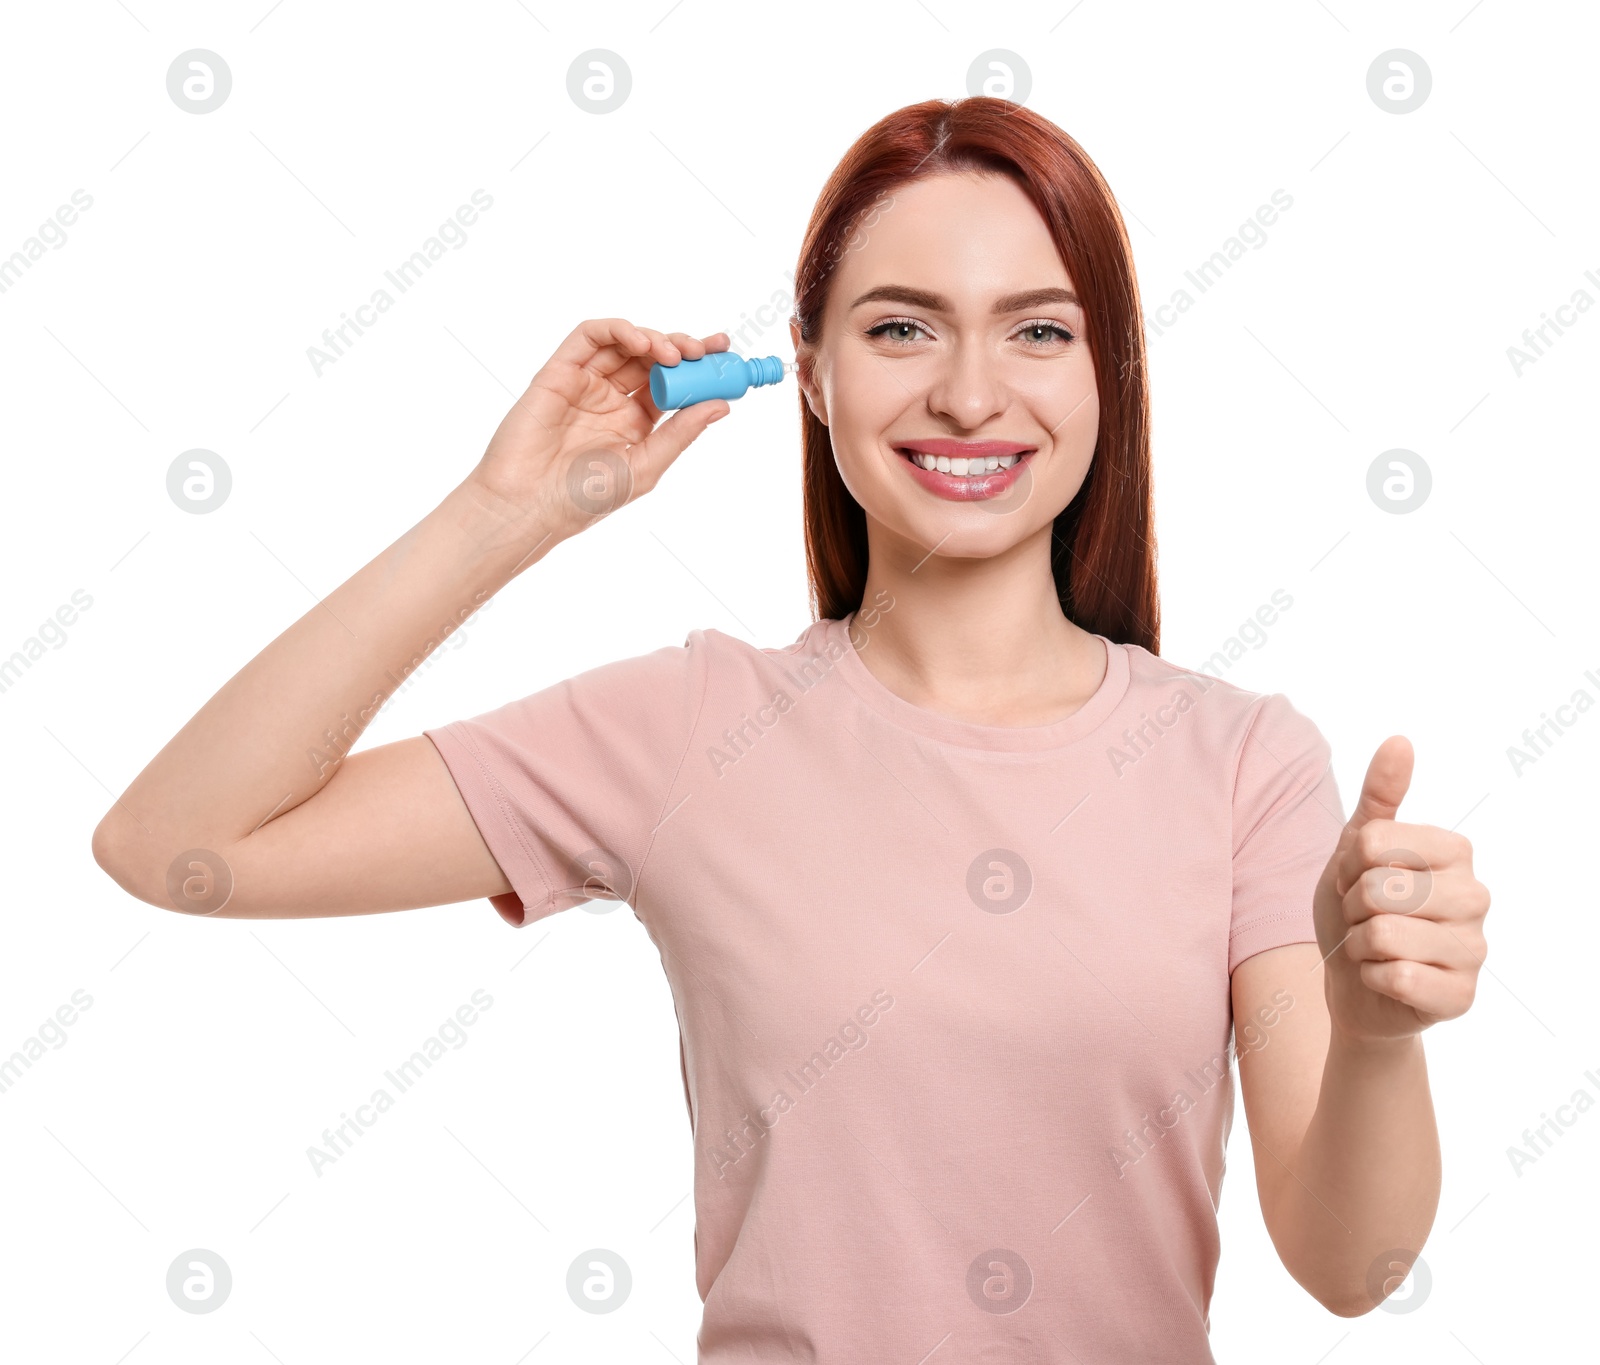 Photo of Woman using ear drops on white background